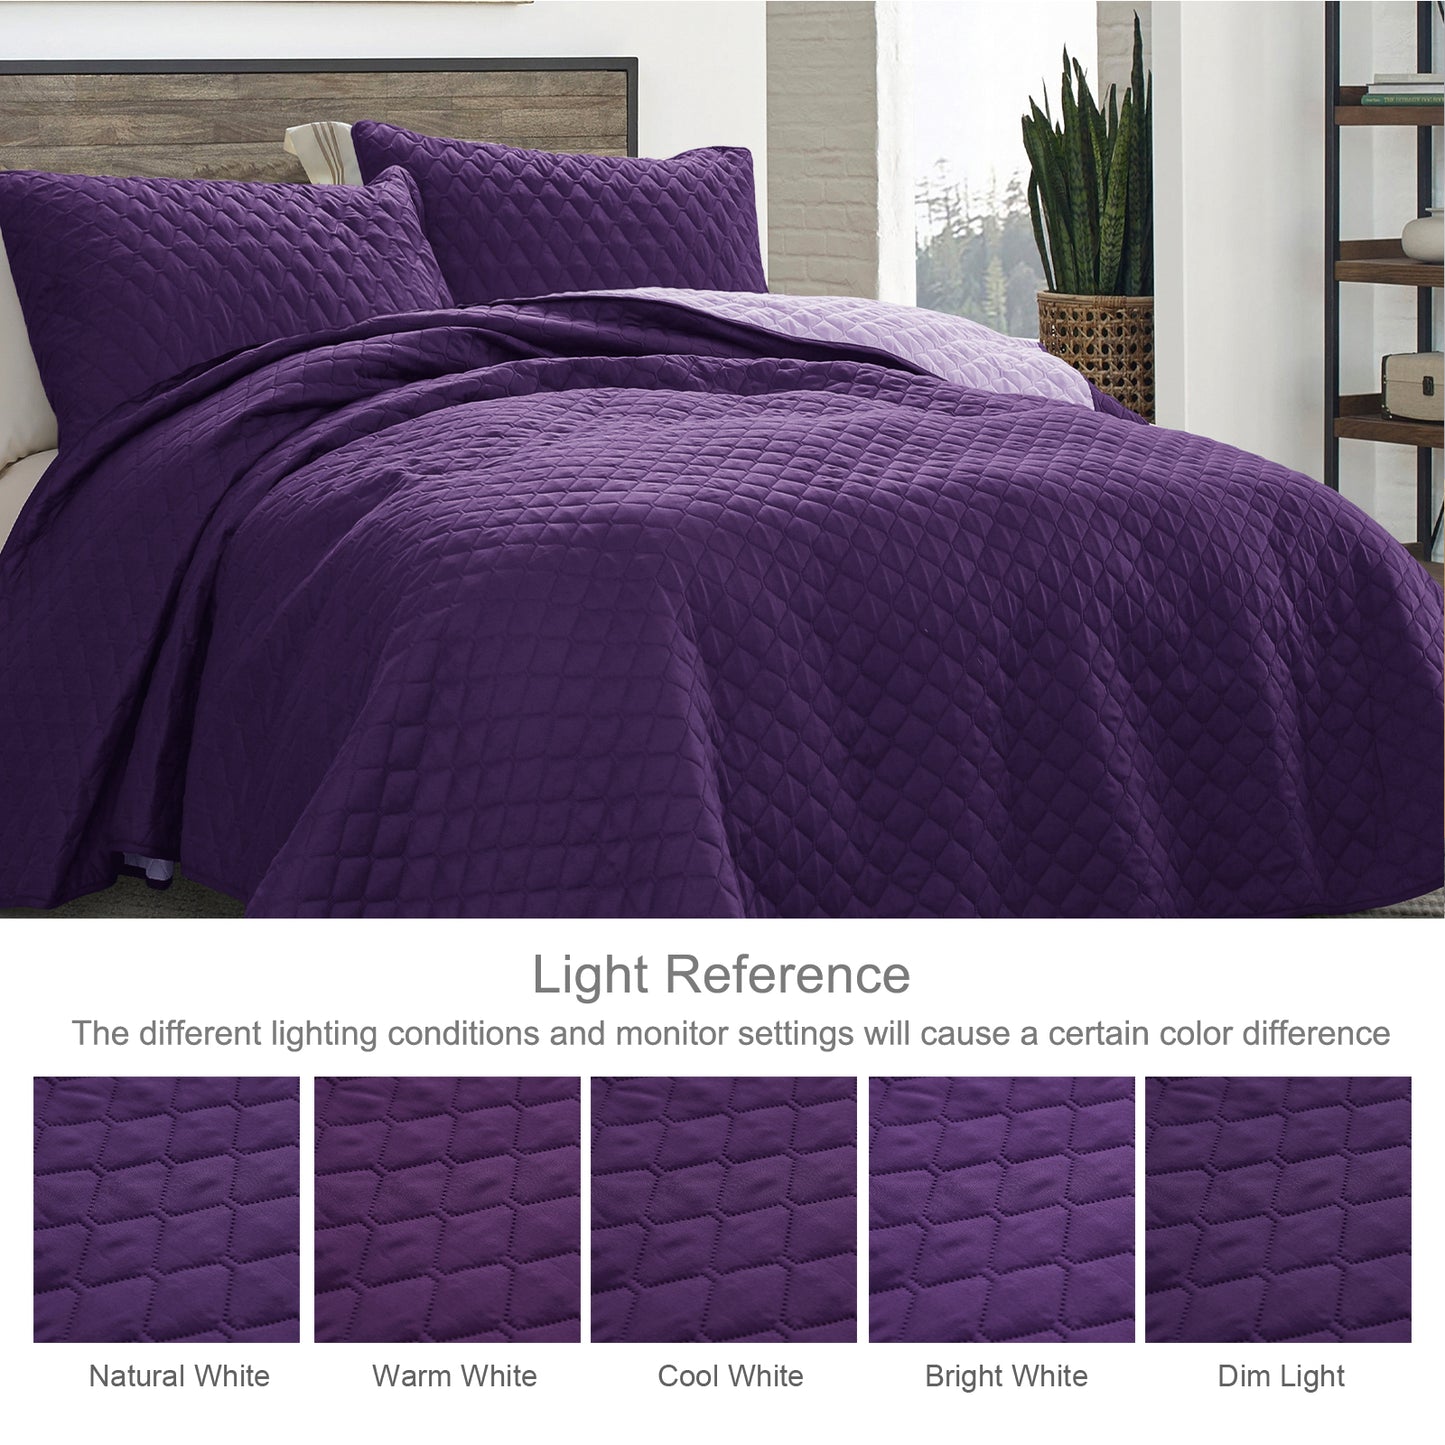 Exclusivo Mezcla Ultrasonic Reversible Twin Quilt Bedding Set with Pillow Sham, Lightweight Quilts Twin Size, Soft Bedspreads Bed Coverlets for All Seasons - (Deep Purple, 68"x88")